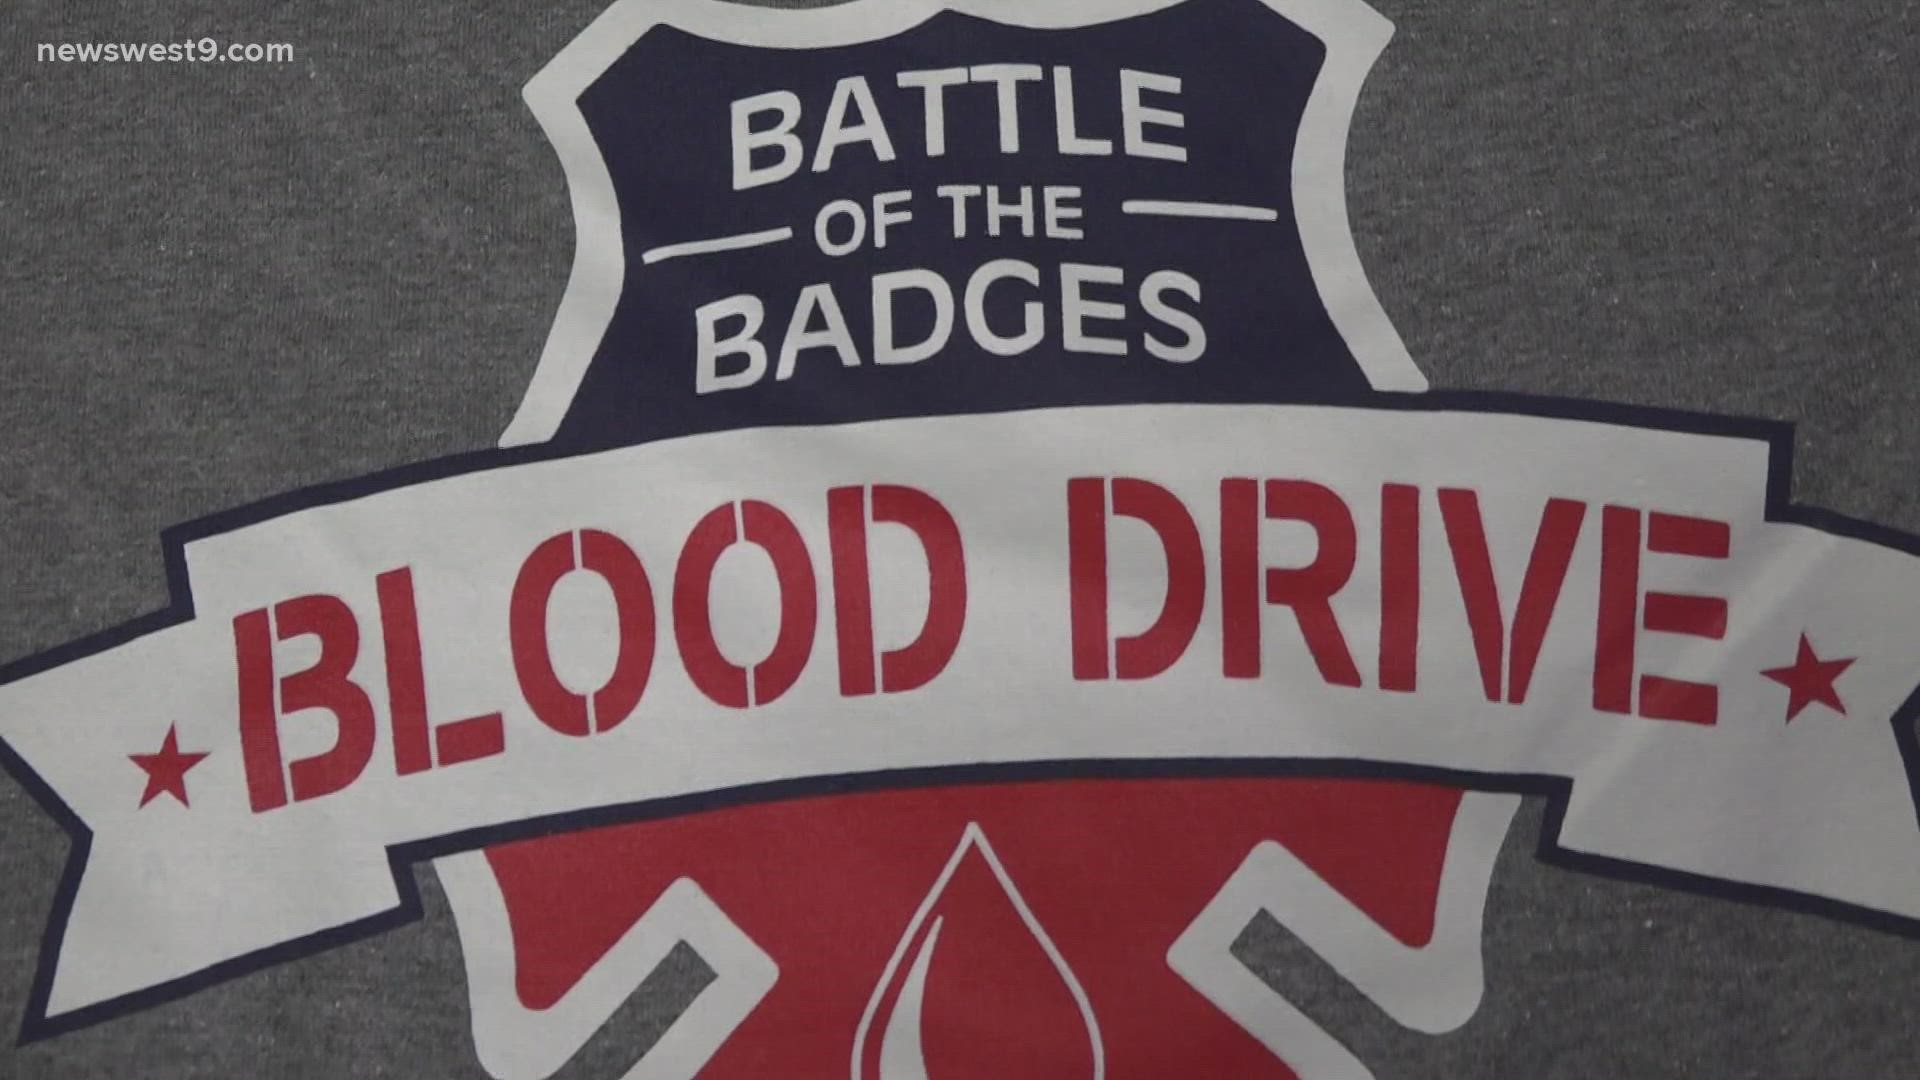 Mark Lindsey, pastor of the First Baptist Church in Big Spring, lost four church members to COVID-19. At Battle of the Badges, he's donating blood to honor them.